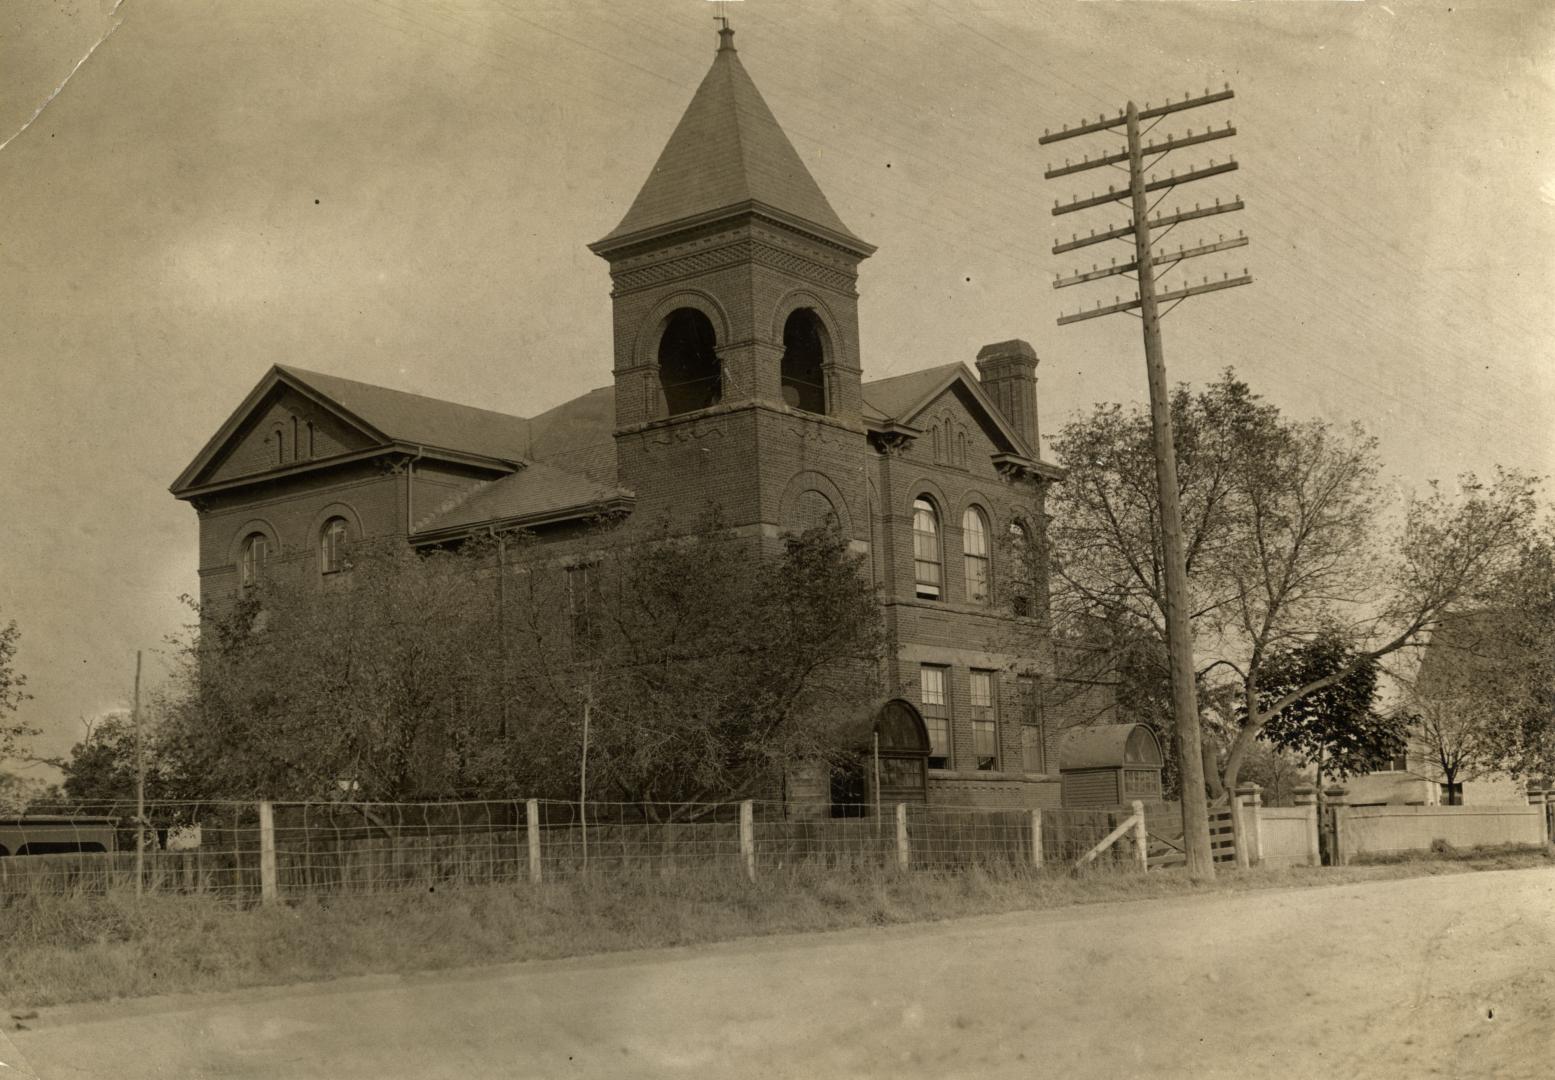 Chester Public School, Broadview Avenue, west side, between Chester Hill Road & Helliwell St